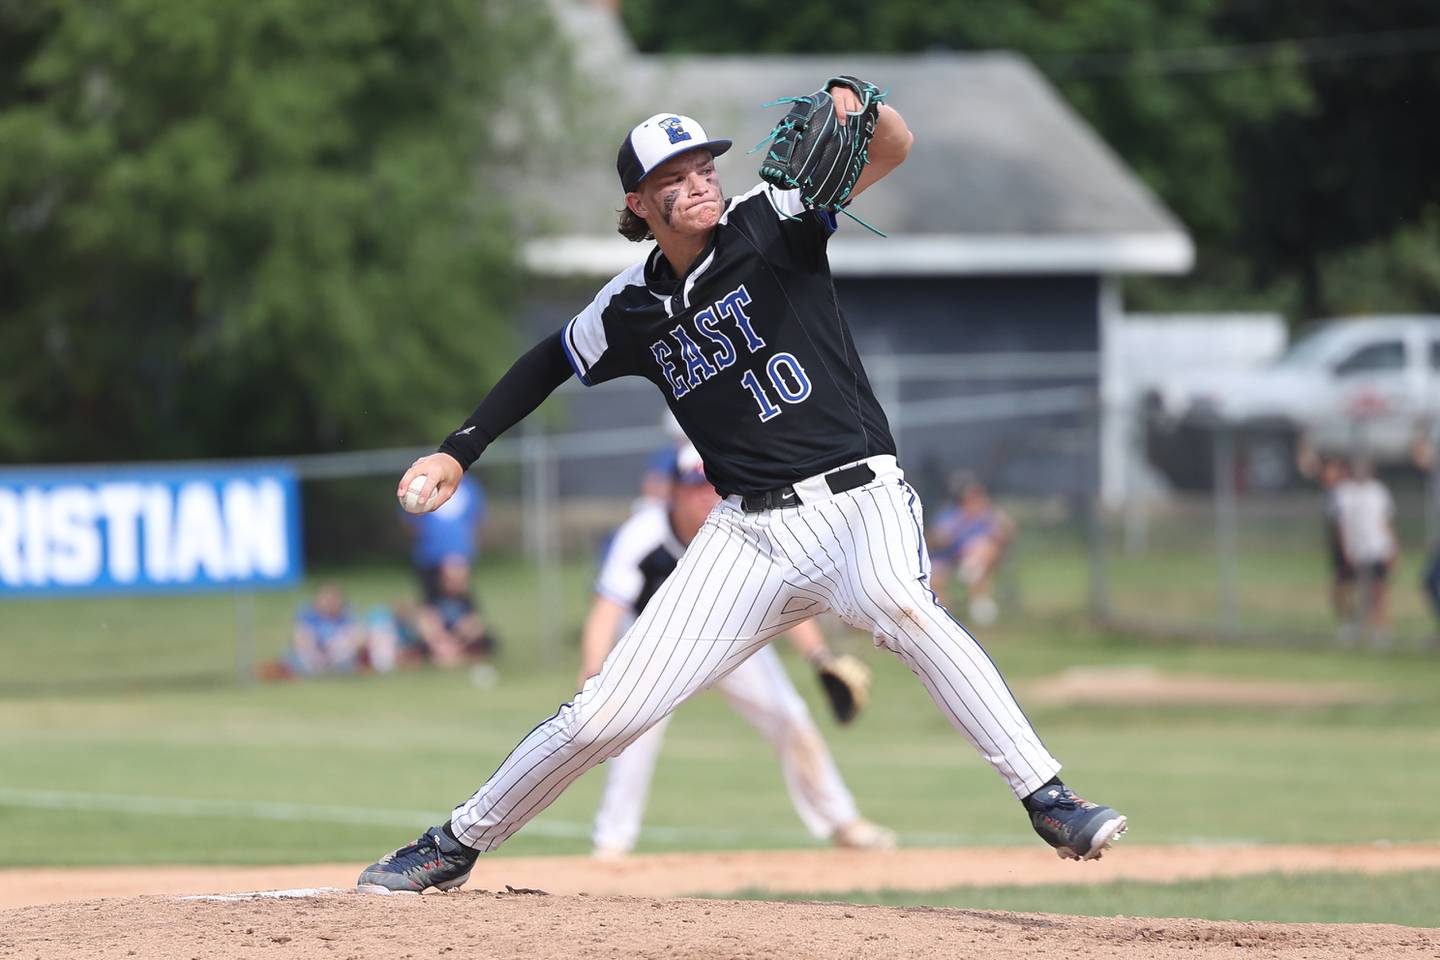 Lincoln-Way East’s Zach Kwasny delivers a pitch against Lincoln-Way West in the Class 4A Lockport Sectional semifinal on Thursday, June 1, 2023 in Lockport.